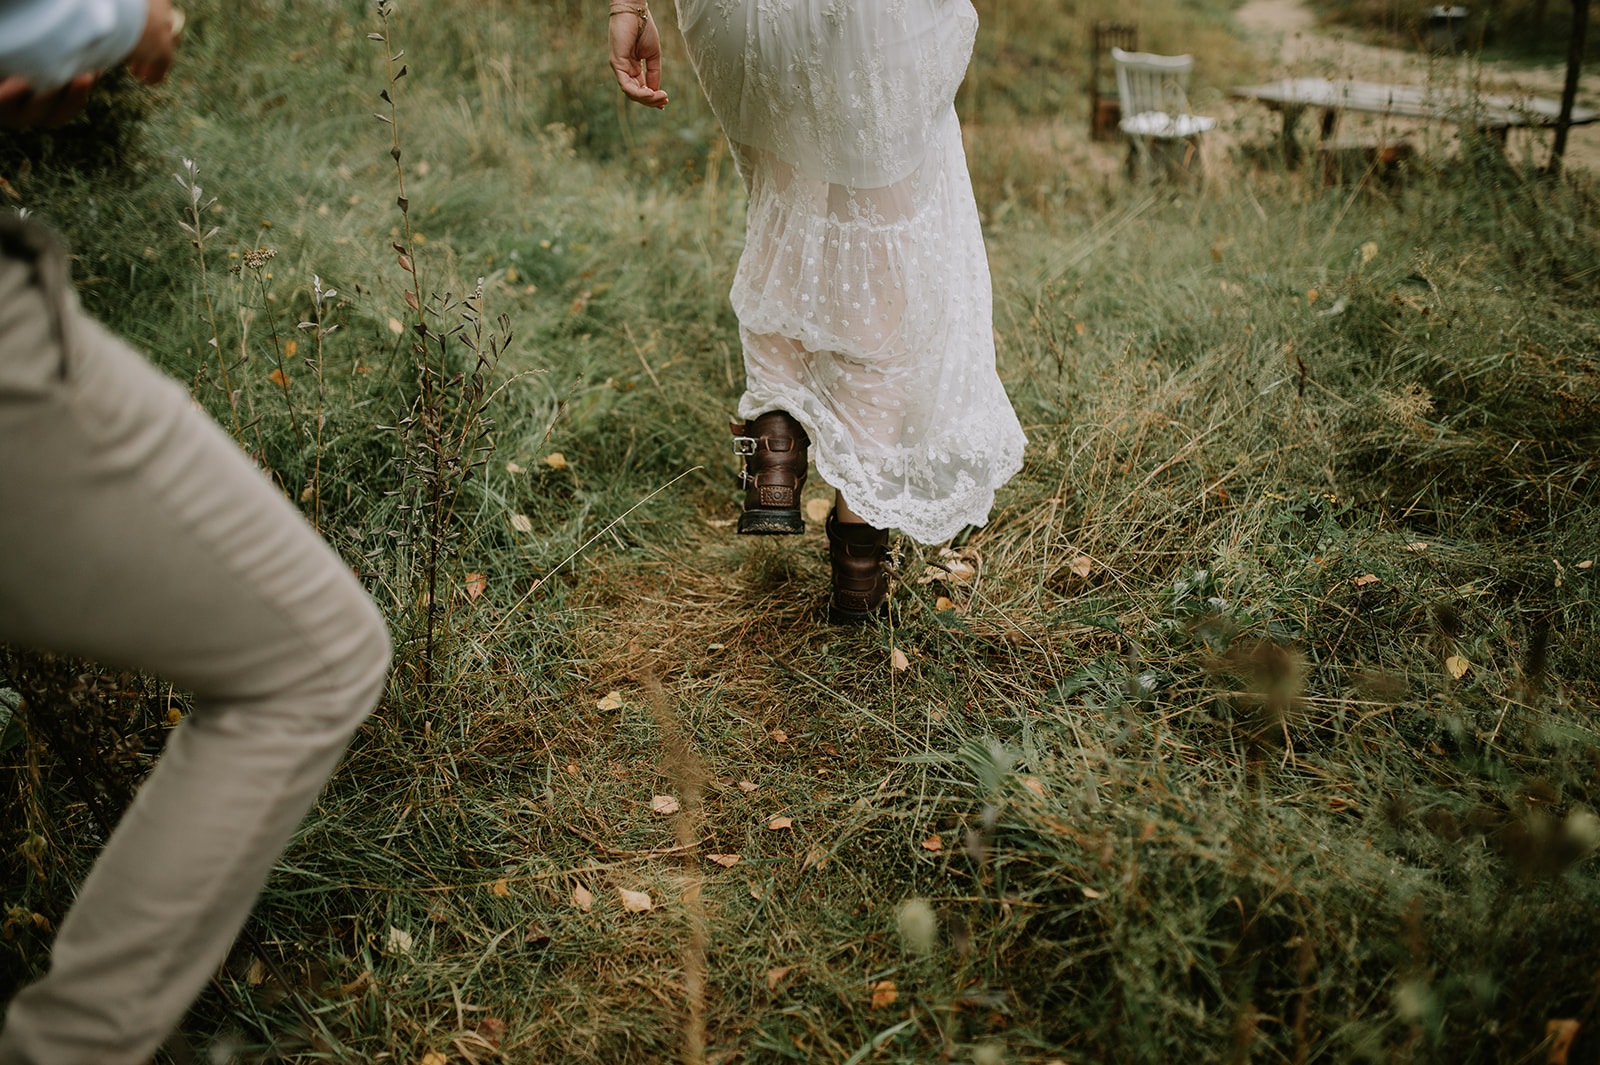 Elopement photographer in the Netherlands, Europe. Elopement with kids in a tiny house in the woods.
Elopement photograp